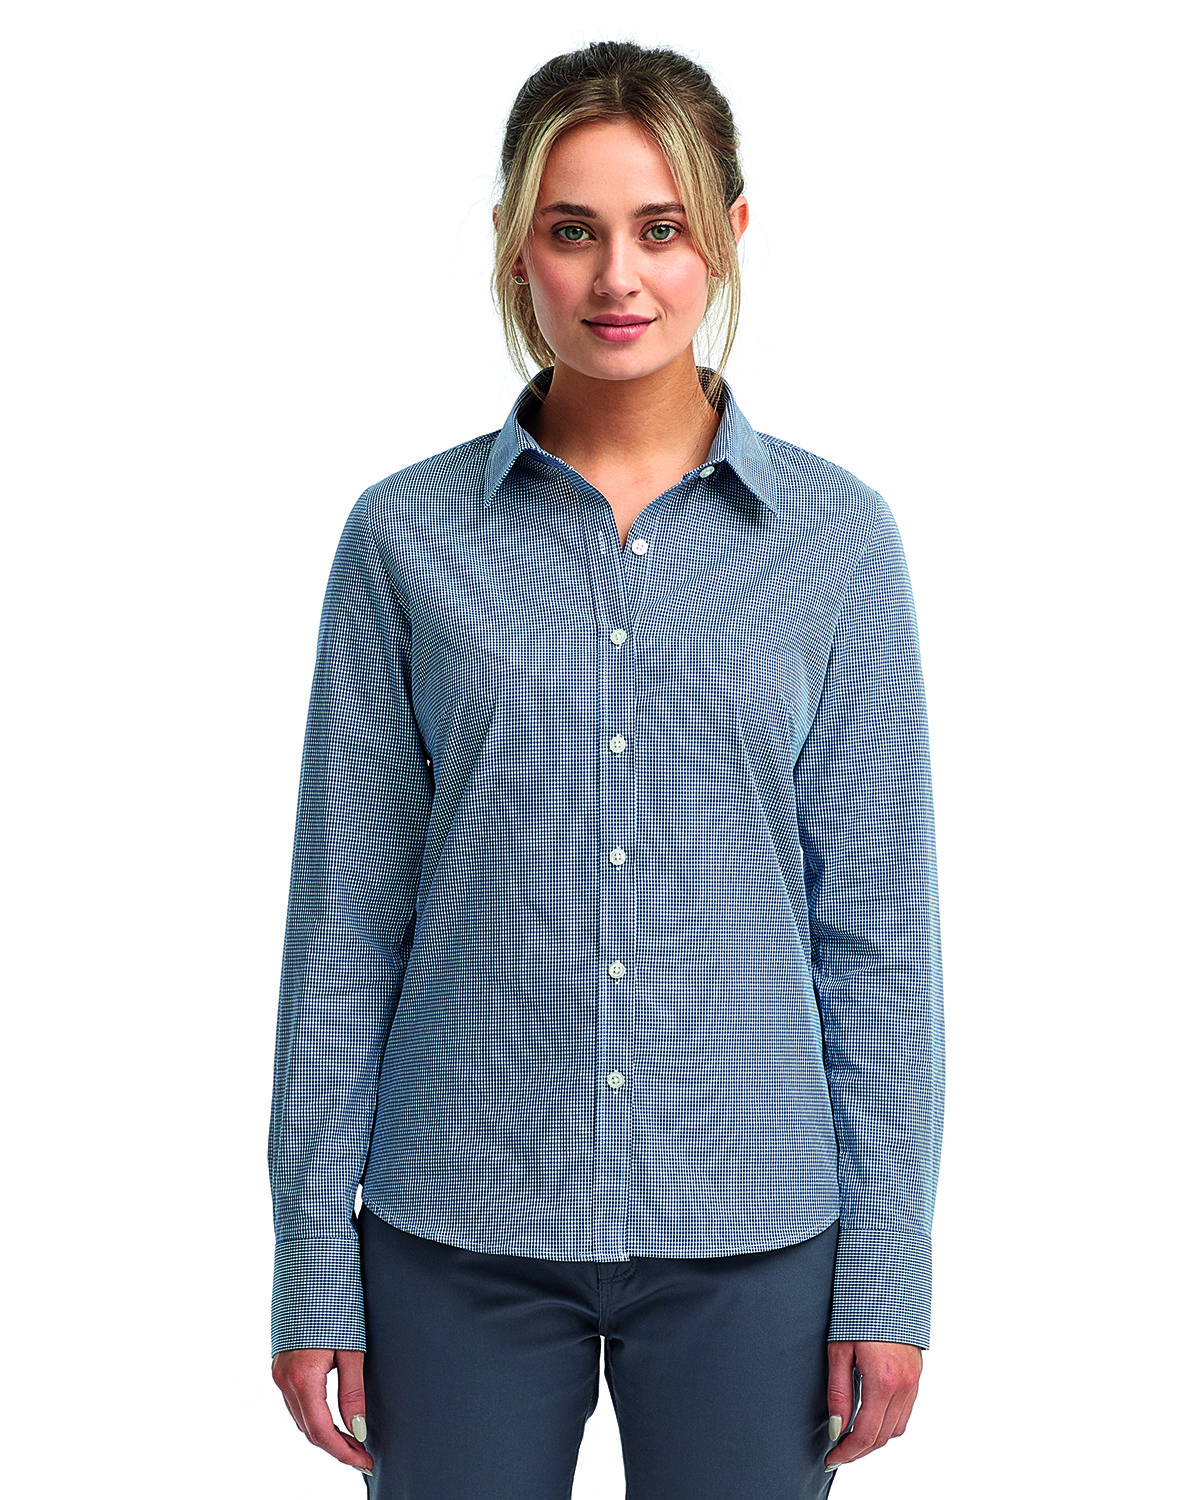 Artisan Collection by Reprime Ladies' Microcheck Gingham Long-Sleeve ...